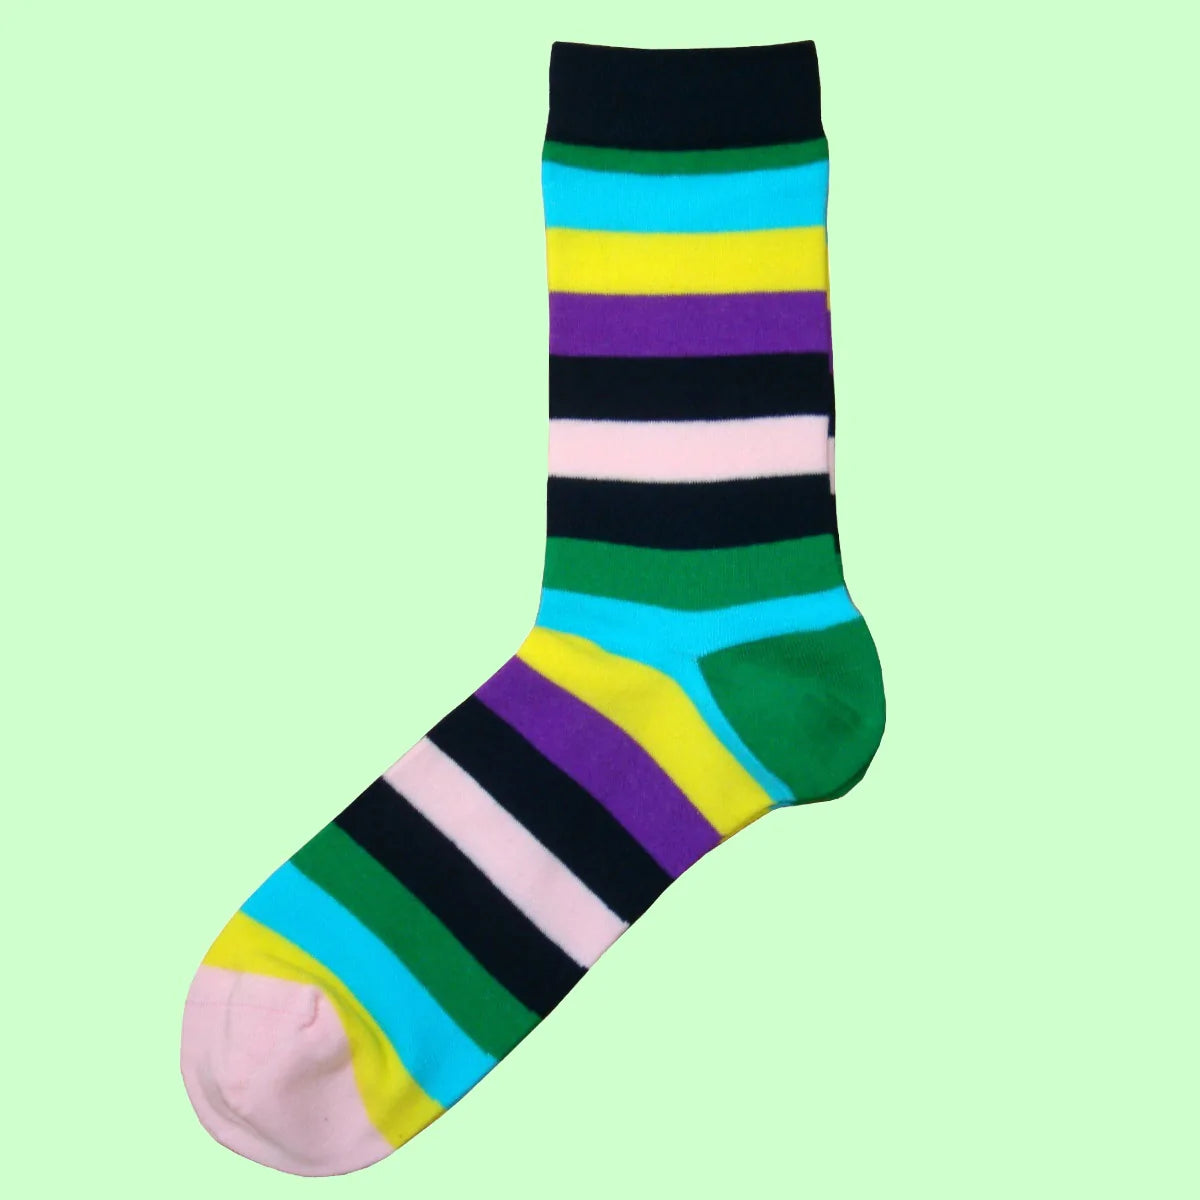 Multi Coloured Striped Men's Socks - Green, Navy, Purple, Yellow, Lilac and Light Blue